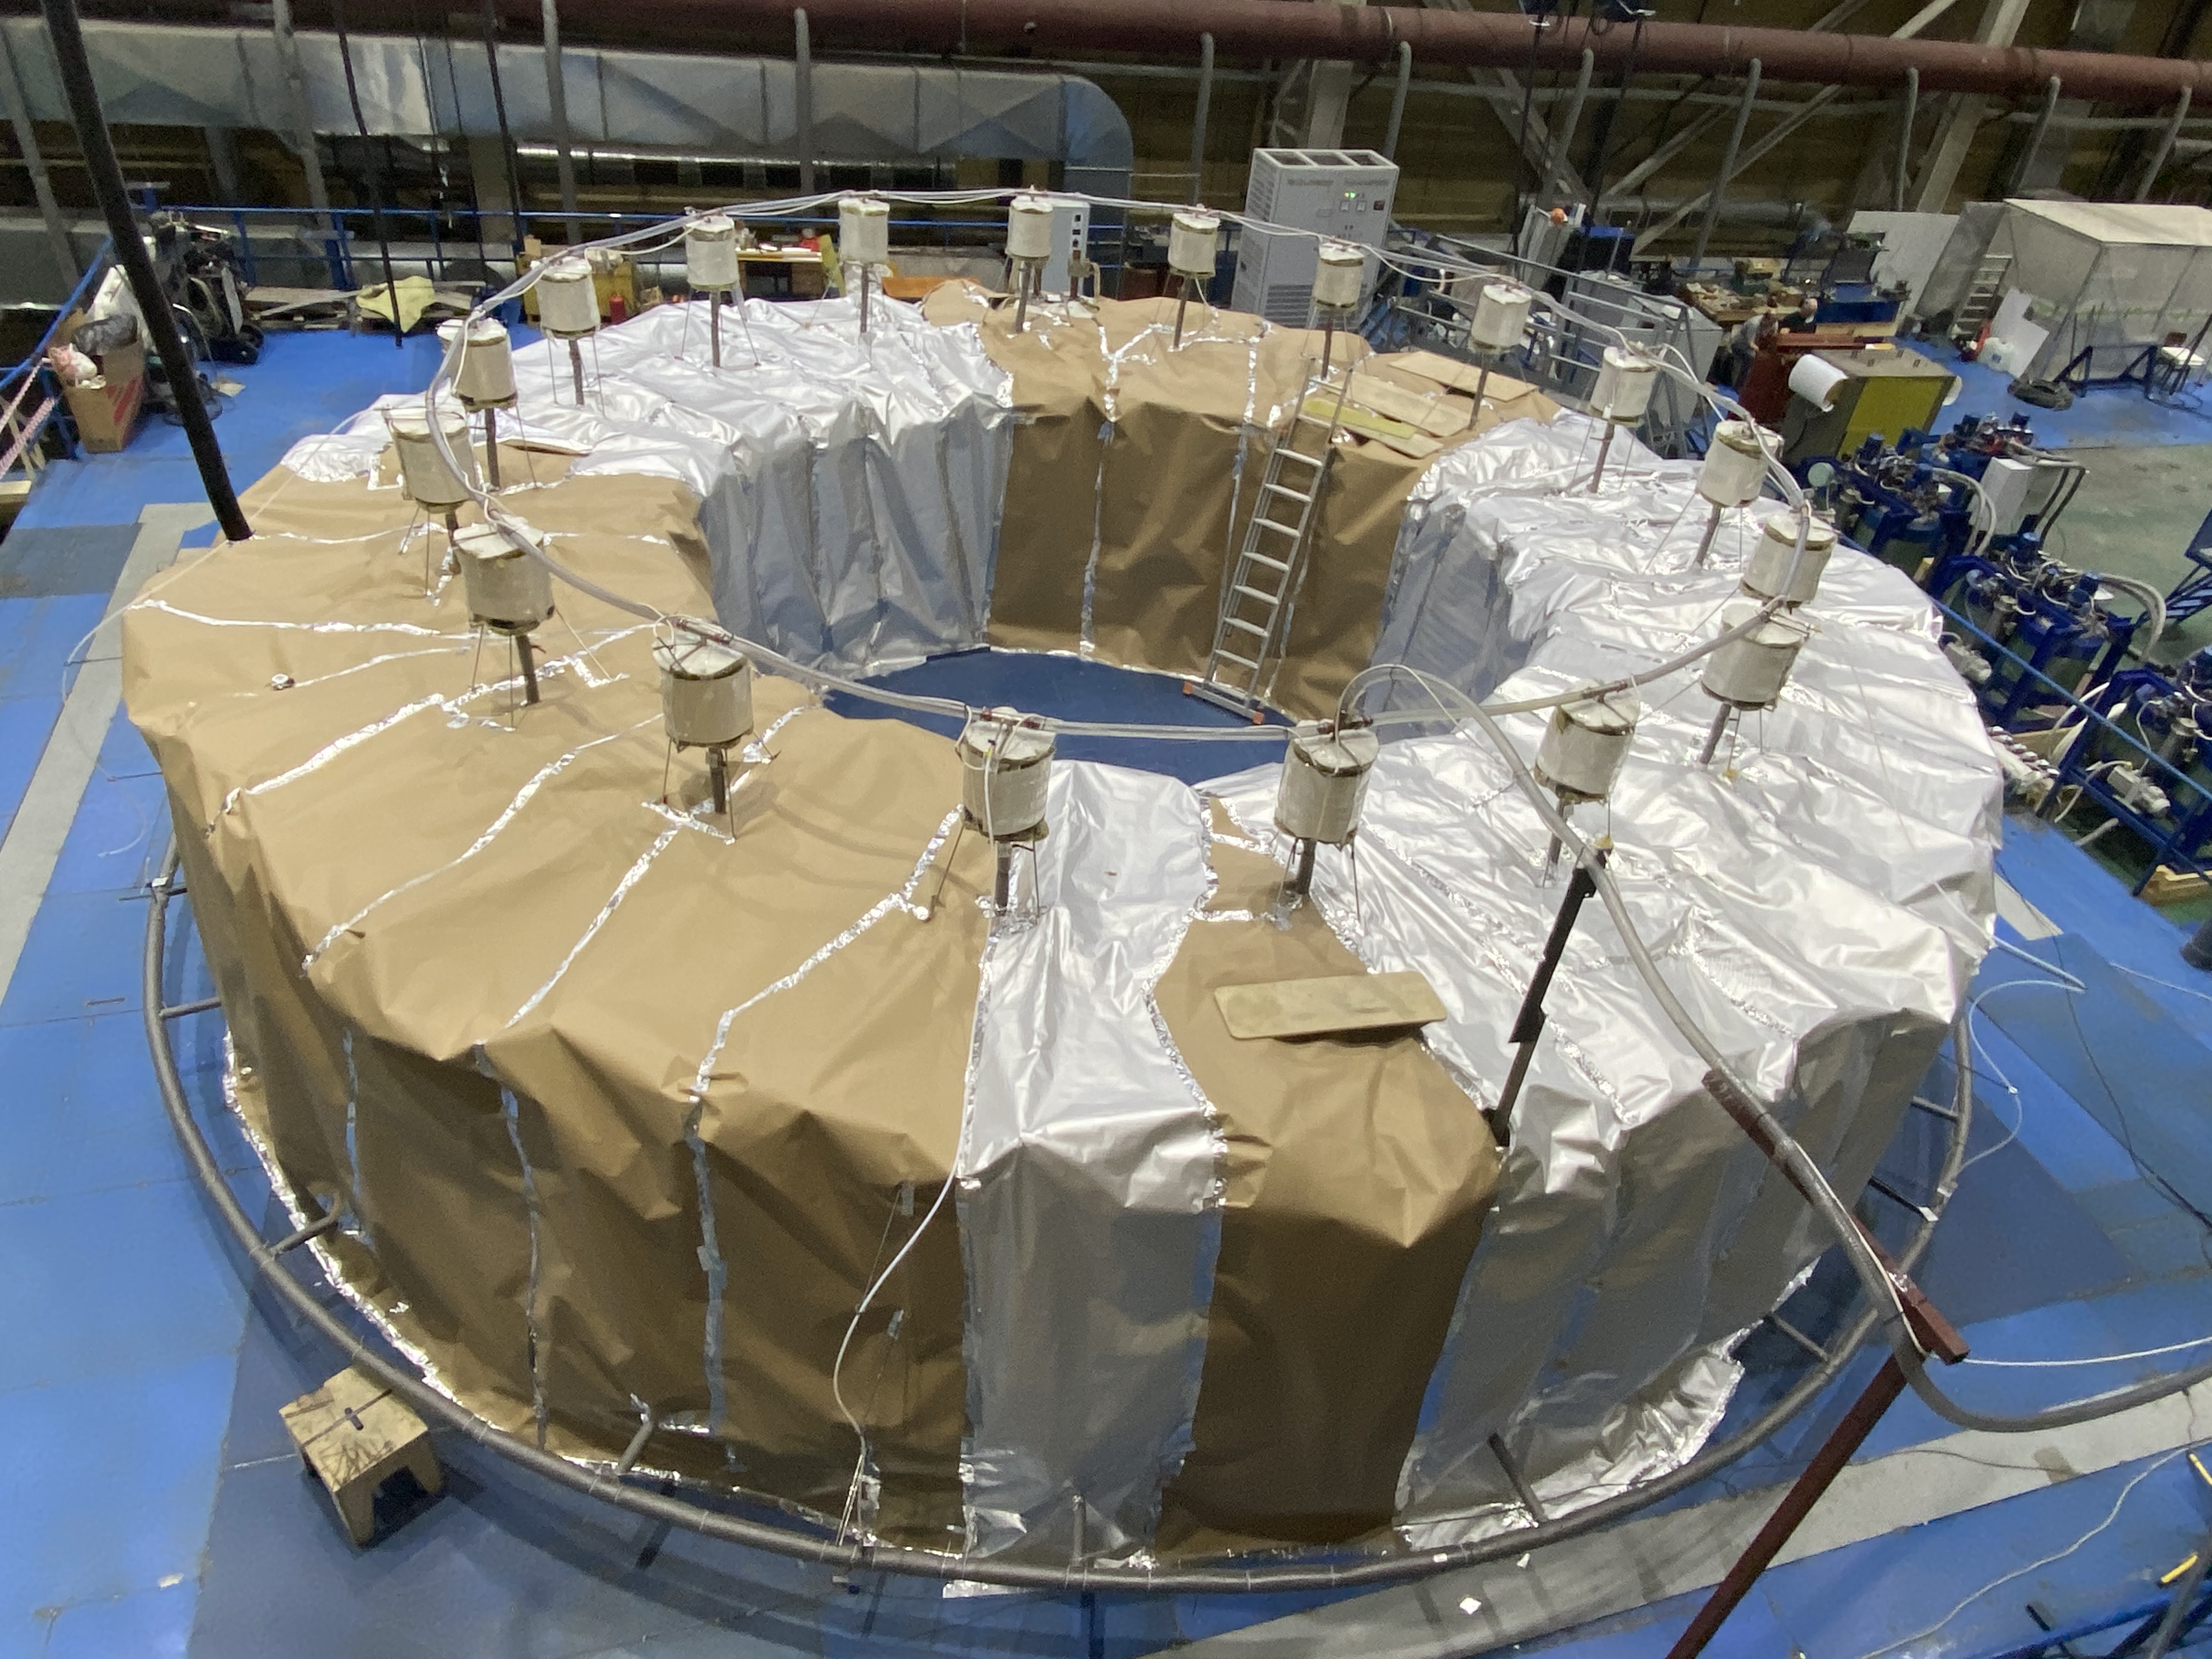 Russian Poloidal Field Coil 1 for the ITER machine has passed a key manufacturing stage